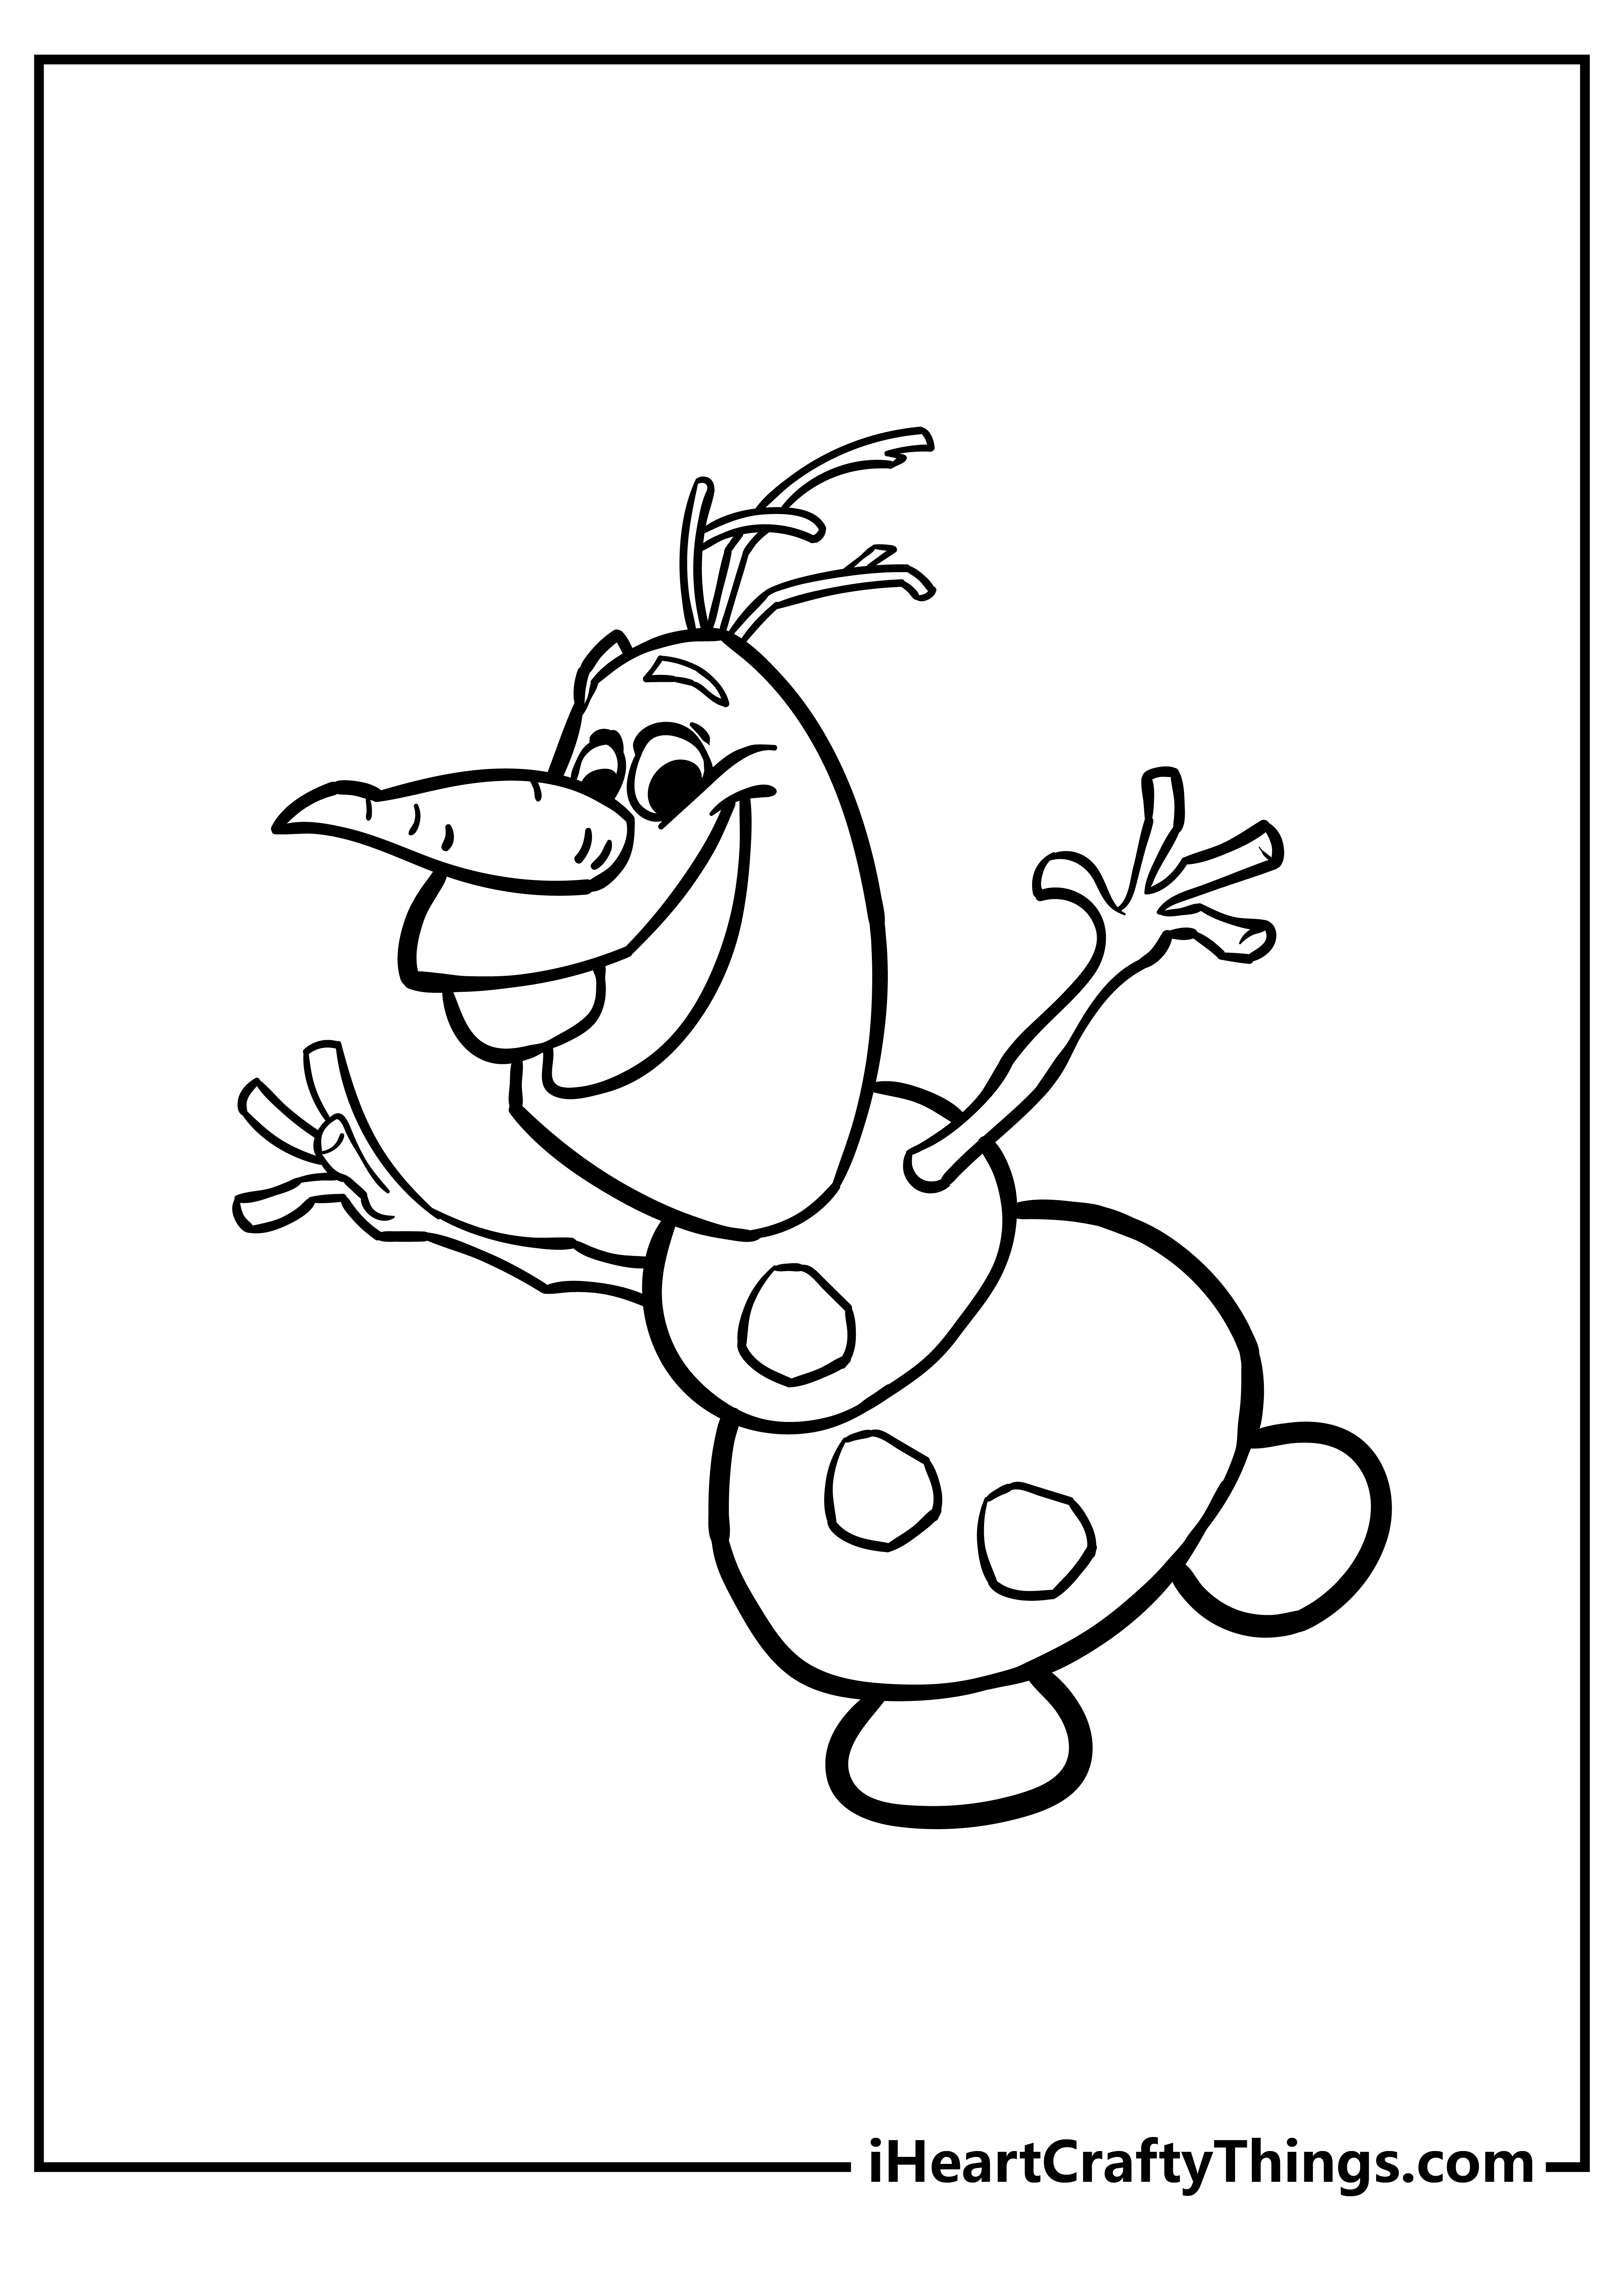 Printable Olaf Coloring Pages Updated 20